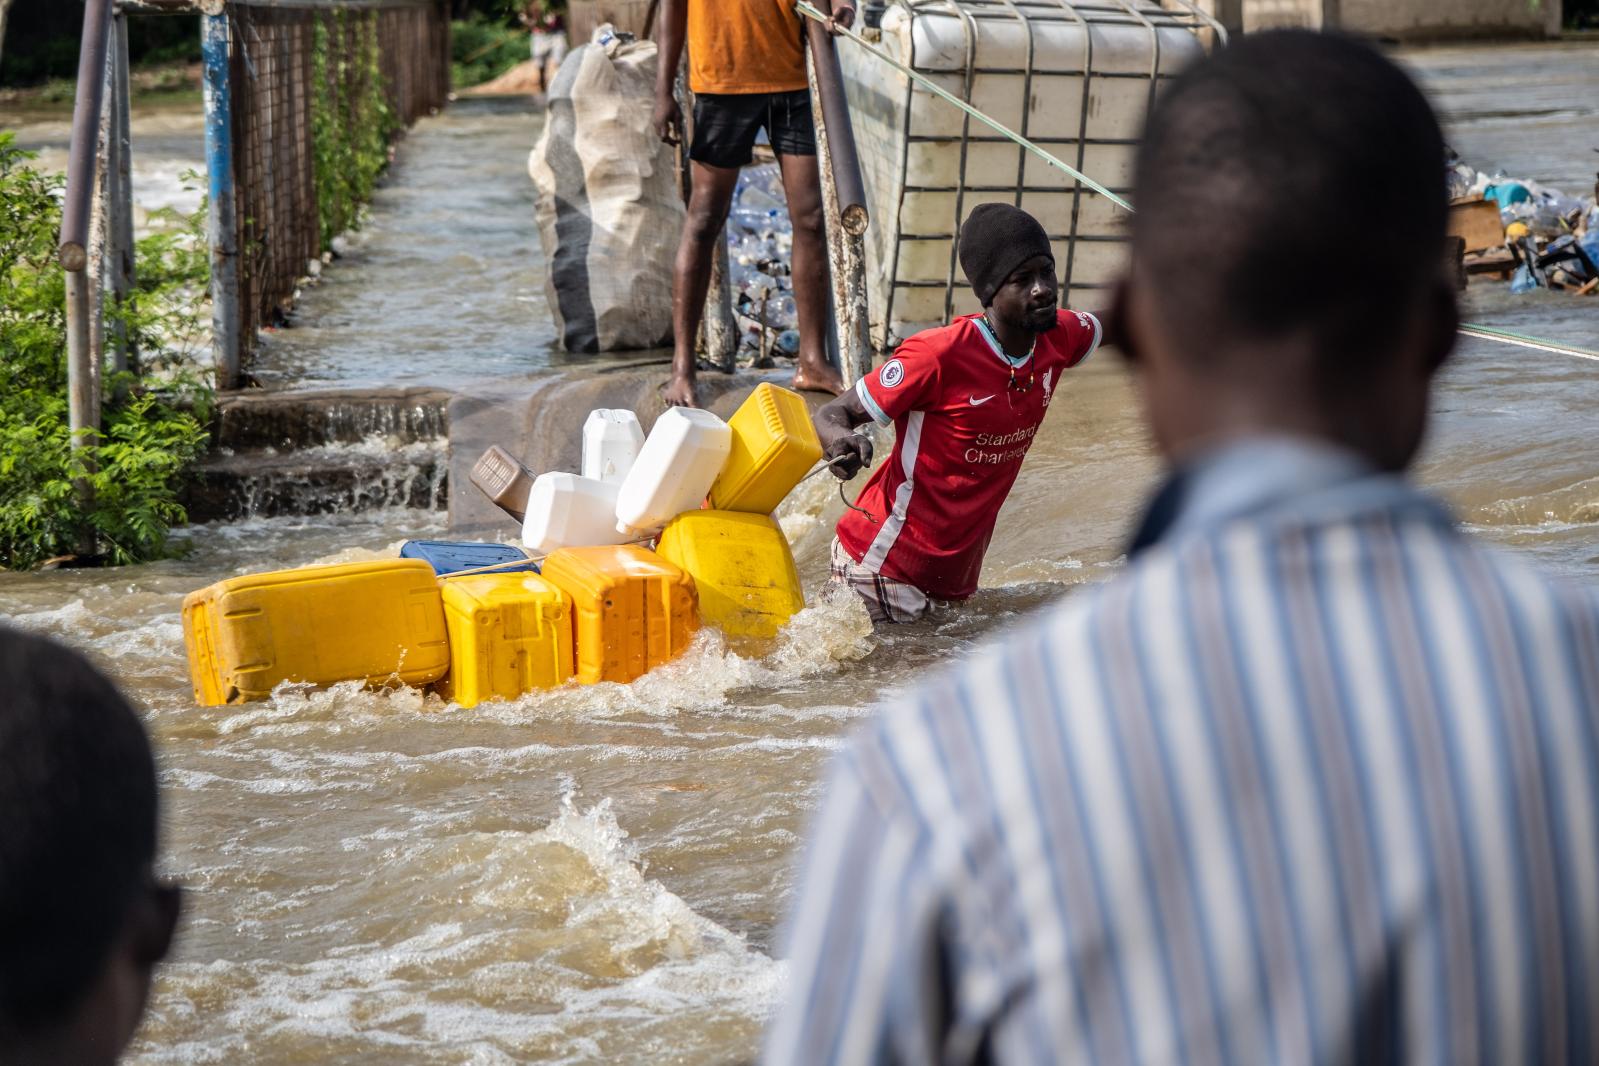 Submerged Realities; Accra's Flooding Problem